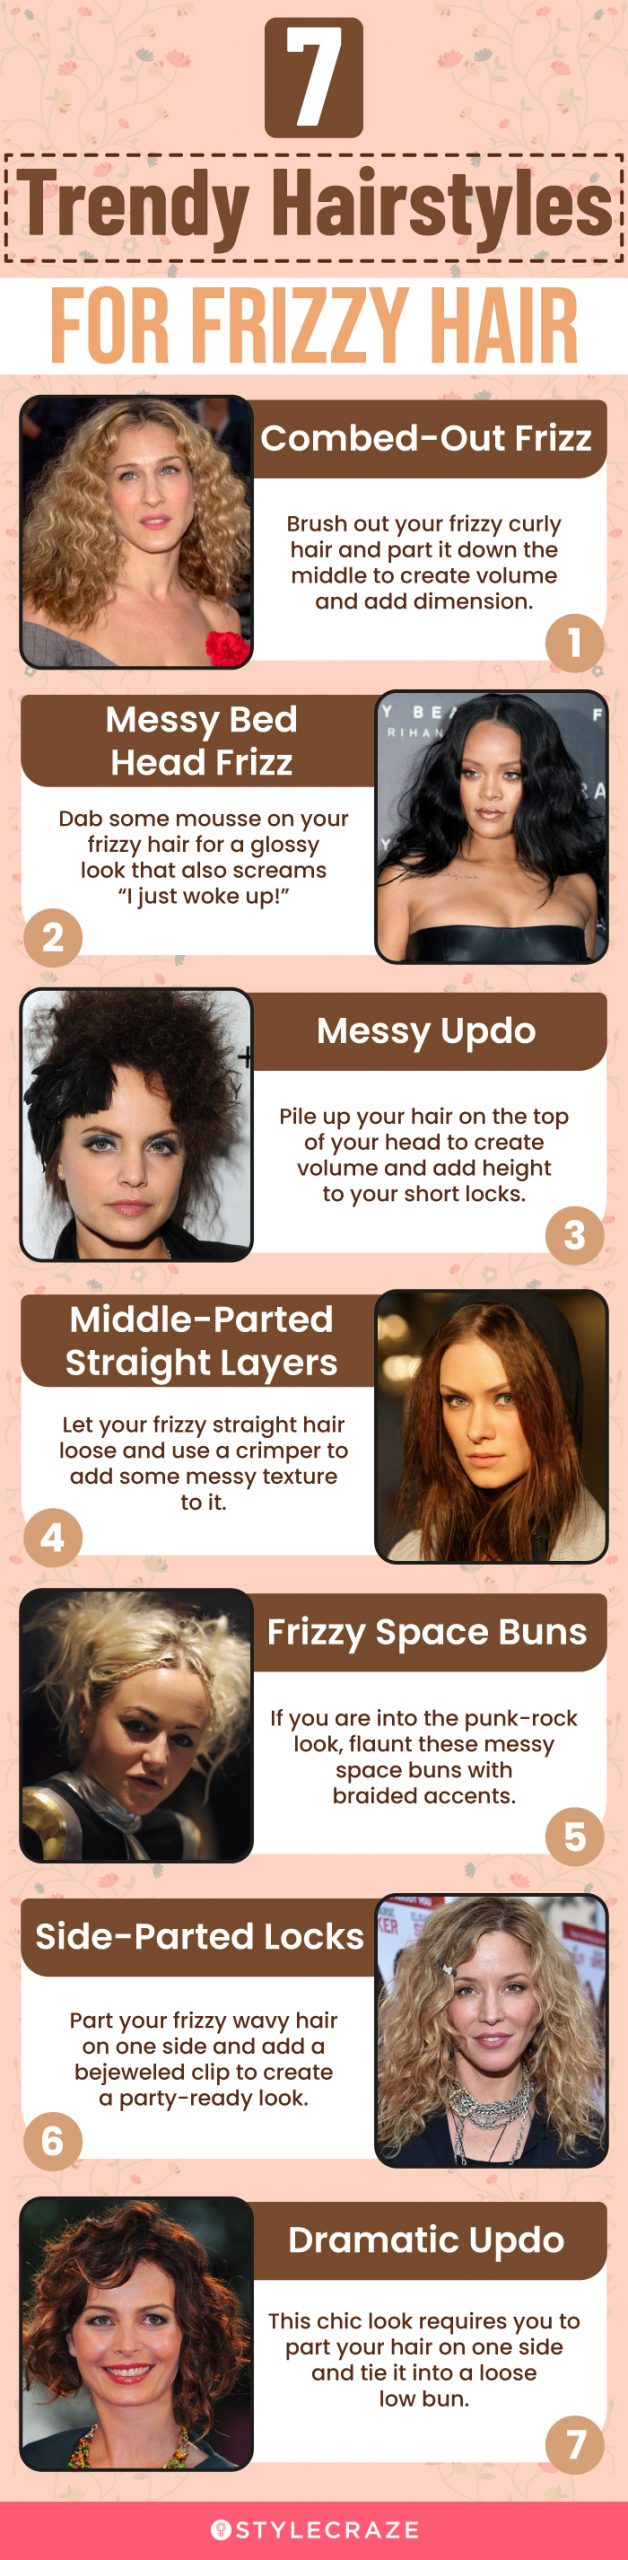 7 trendy hairstyles for frizzy hair (infographic)